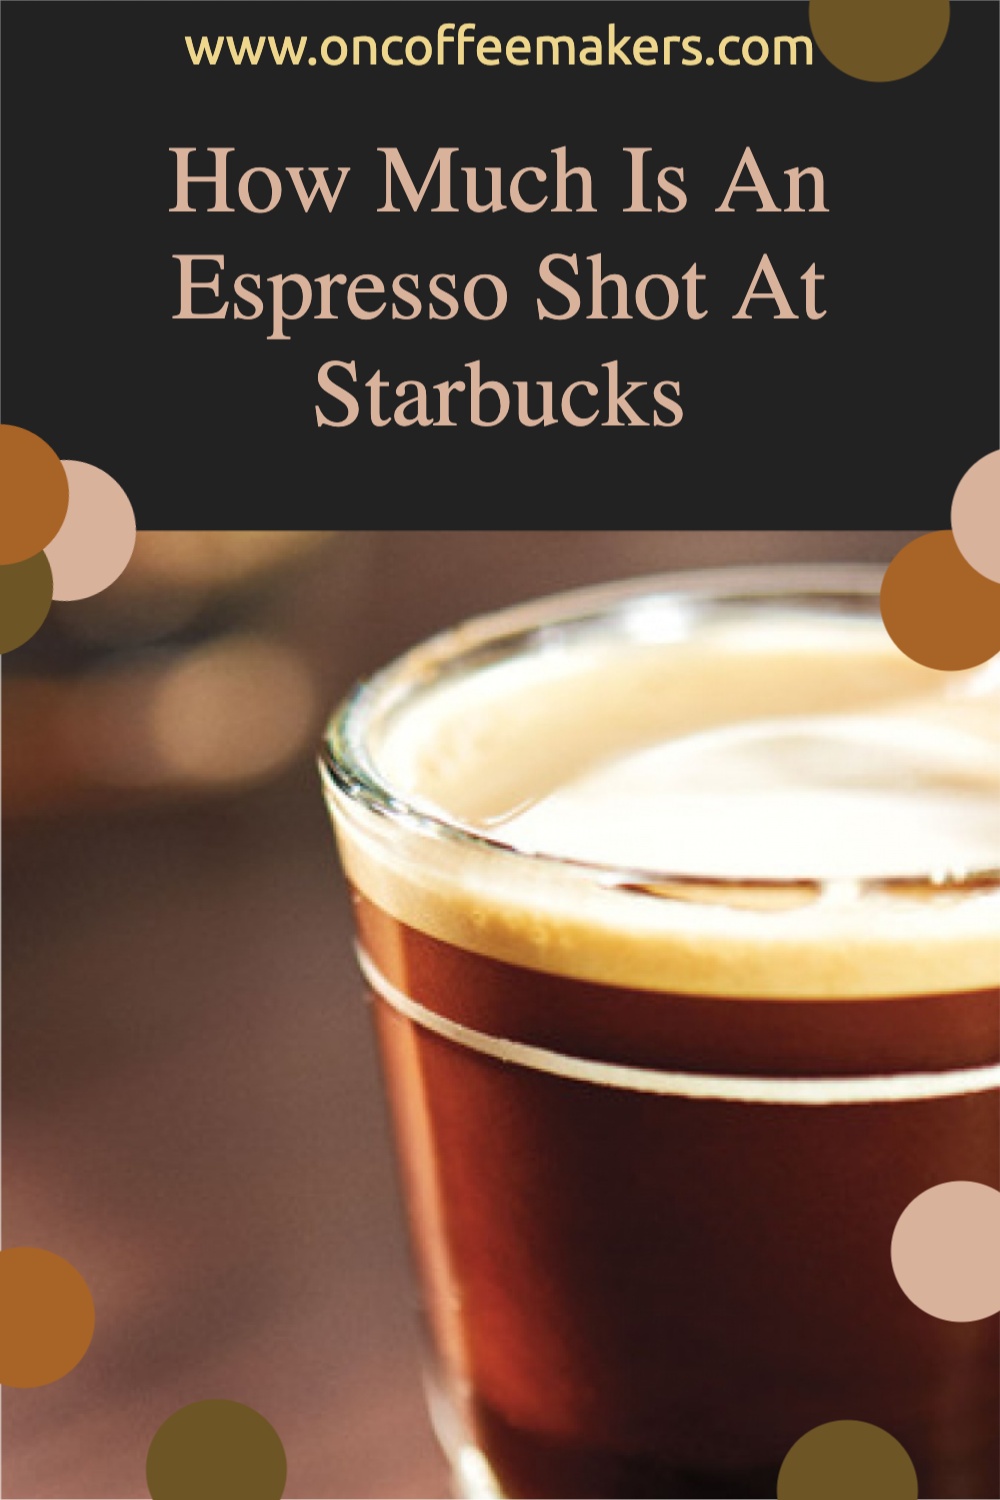 https://www.oncoffeemakers.com/images/xHow-Much-Is-An-Espresso-Shot-At-Starbucks.jpg.pagespeed.ic.vOq_0BPreD.jpg